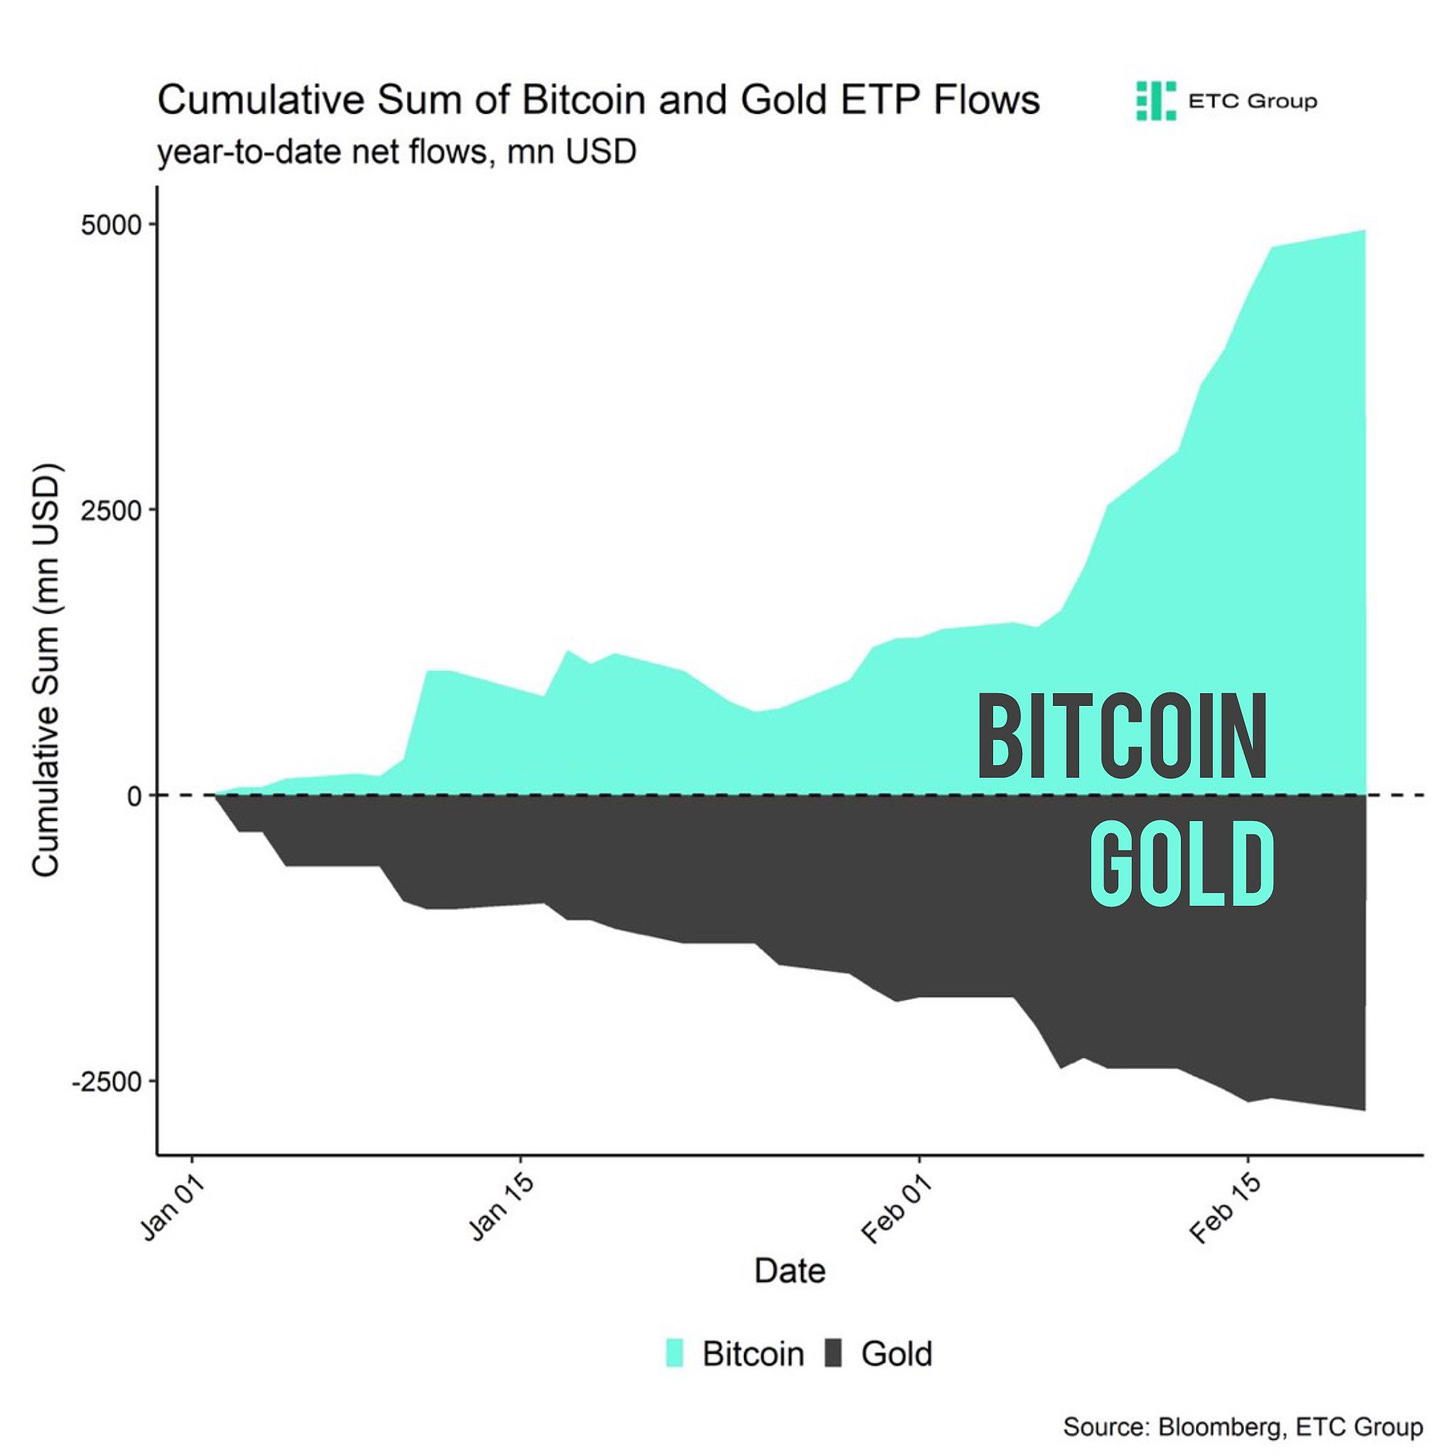 Bitcoin Archive on X: "Bitcoin ETFs are growing. Gold ETFs are losing  funds. https://t.co/bpMRvjgs0U" / X